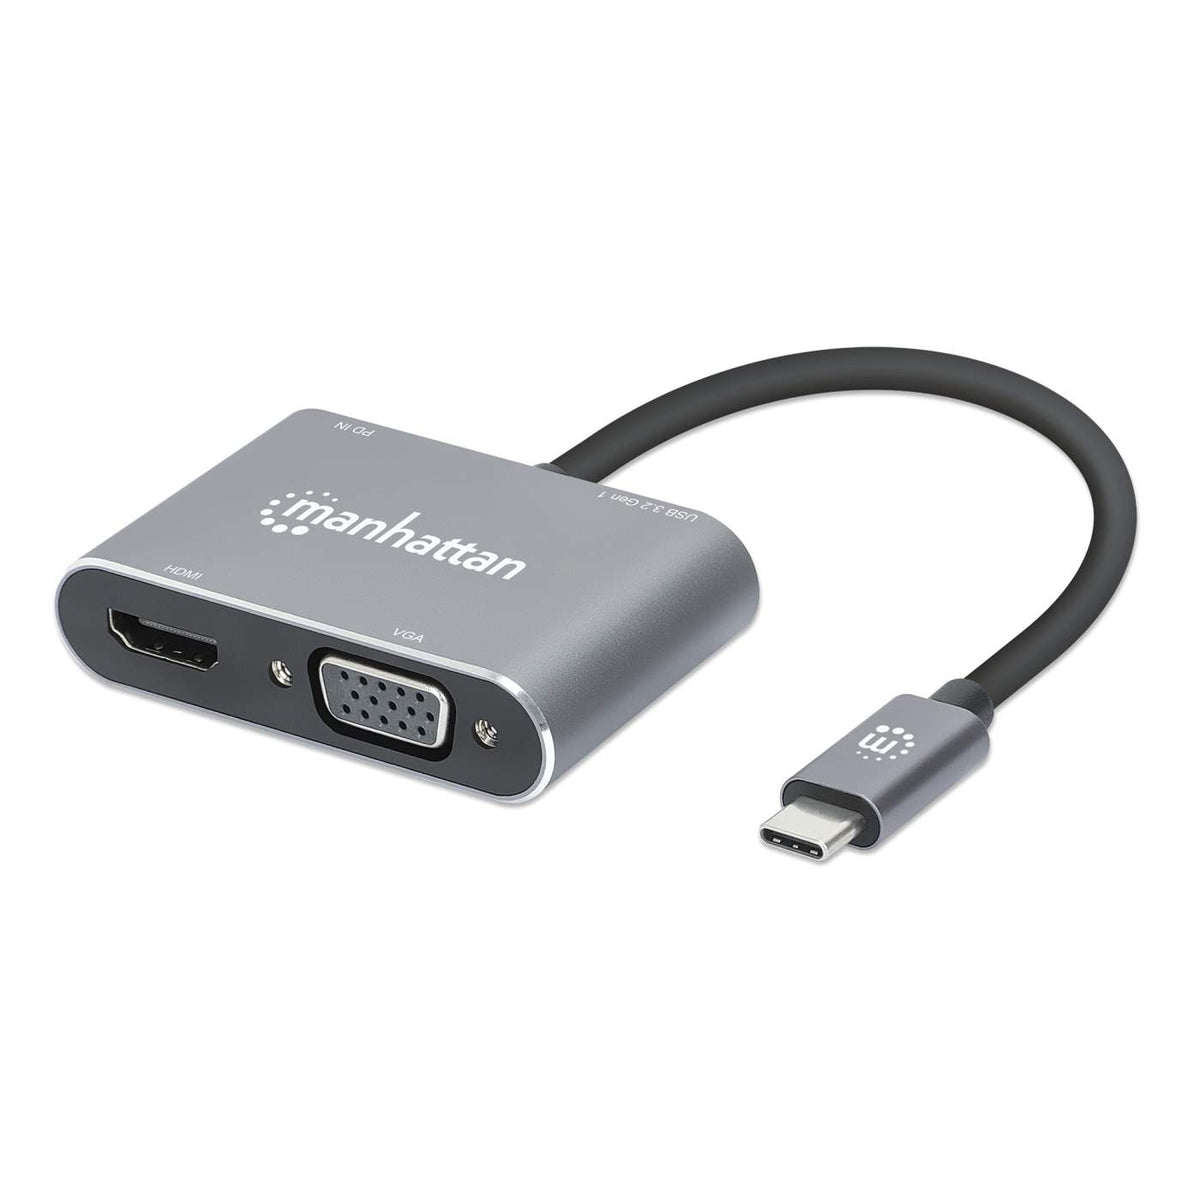 USB-C to HDMI & VGA 4-in-1 Docking Converter w/ Power Delivery